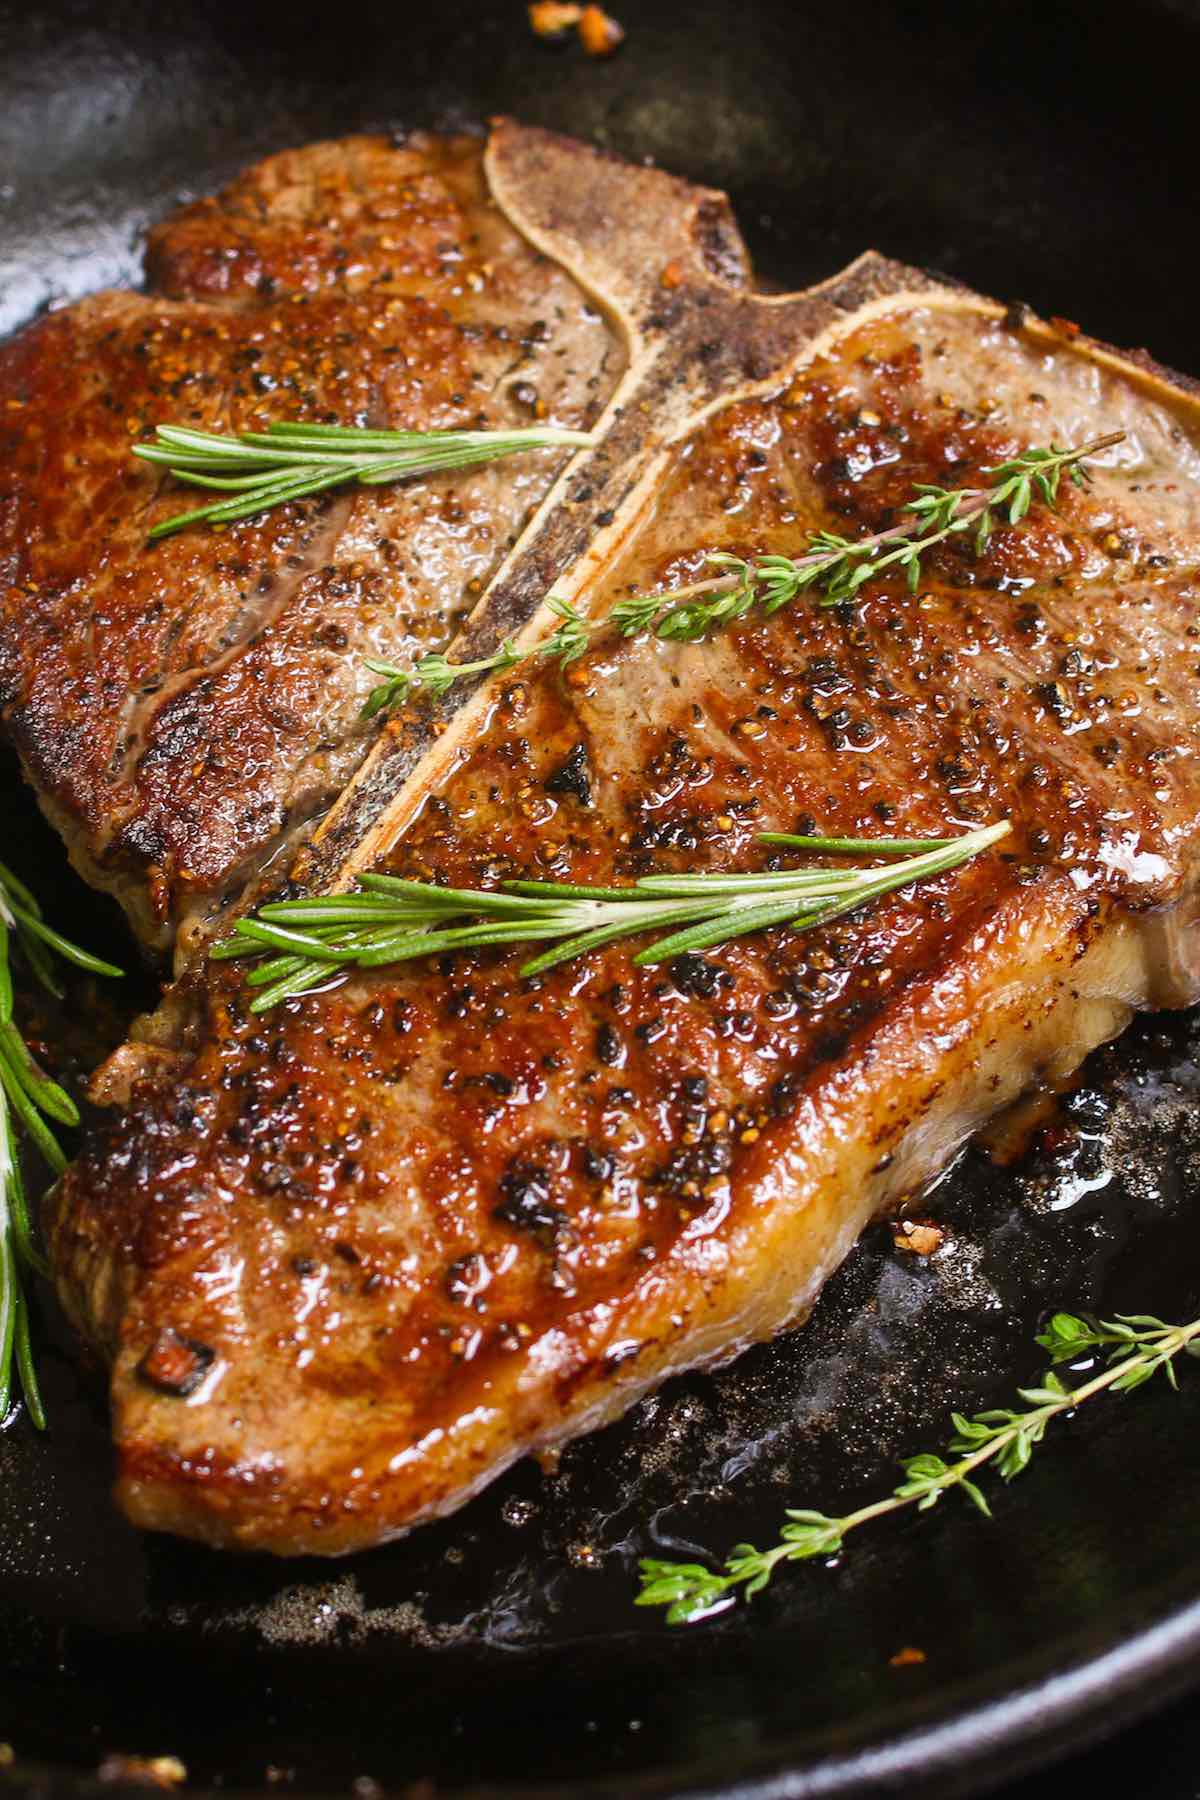 A Porterhouse steak recipe that's been pan seared at high temperature and finished in the oven producing a beautiful golden crust